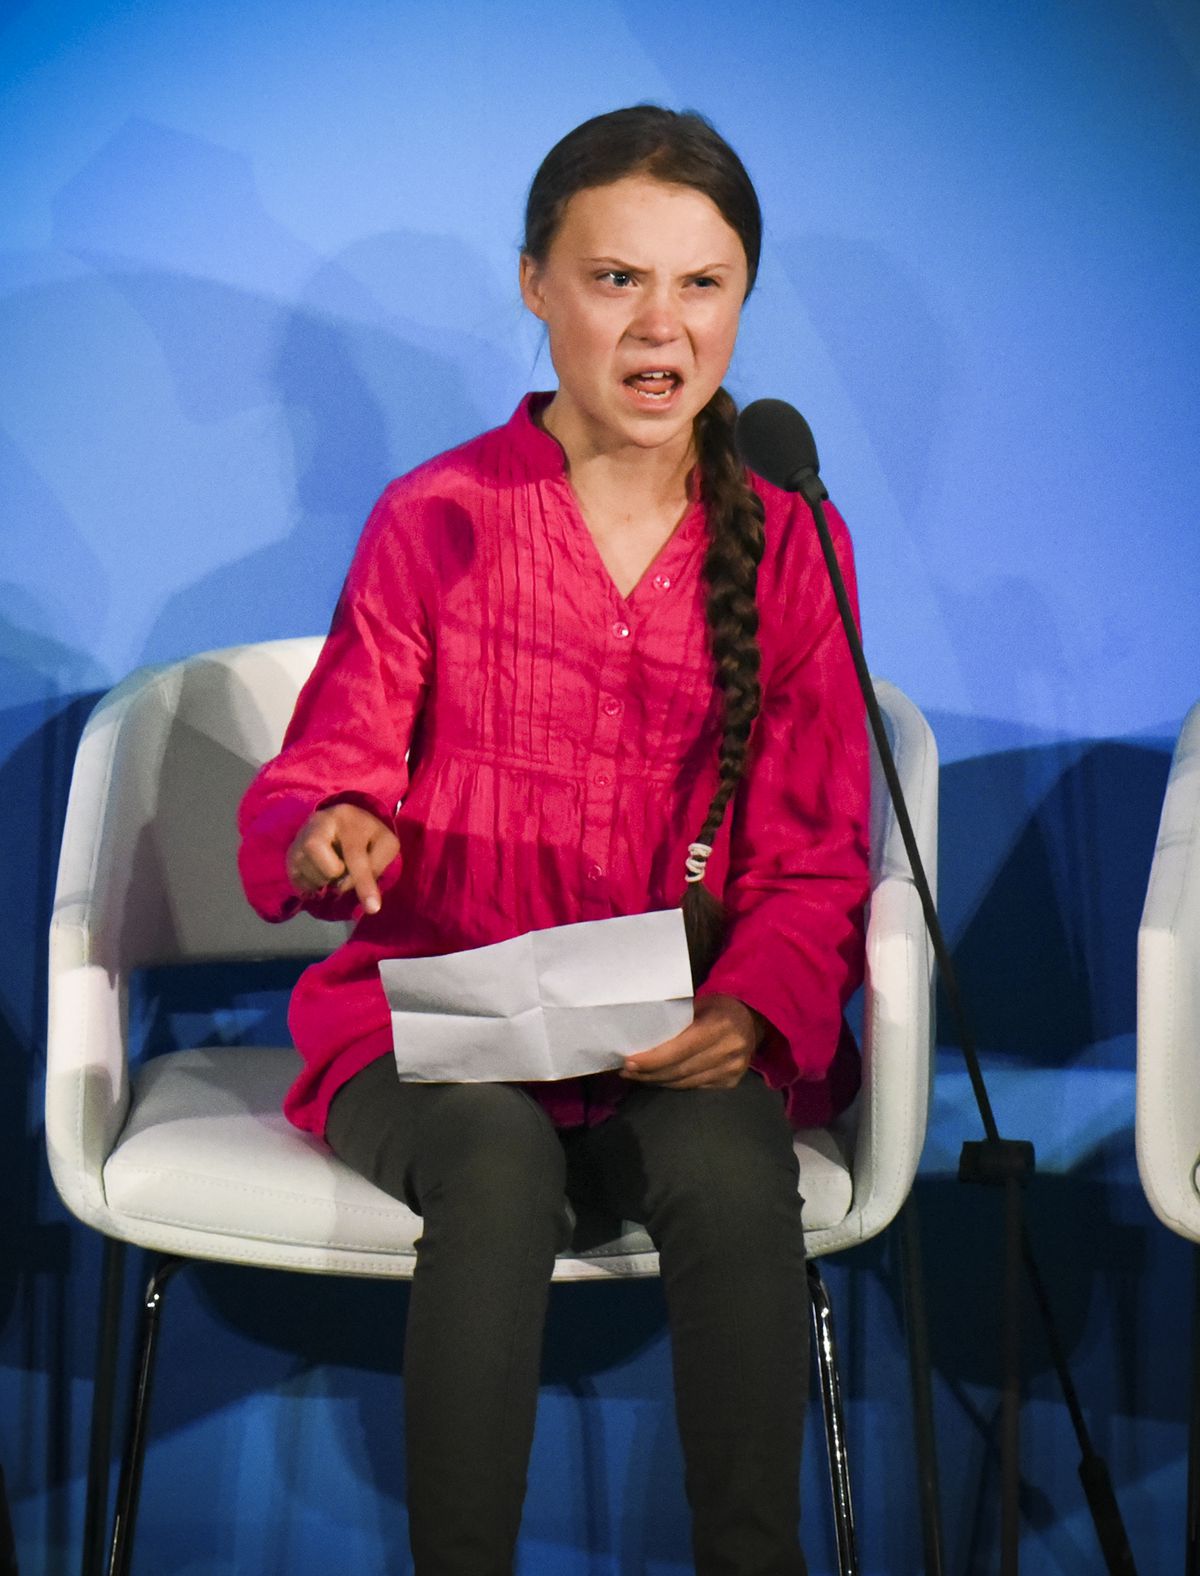 Climate activist Greta Thunberg scolding world leaders during the UN Climate Action Summit.